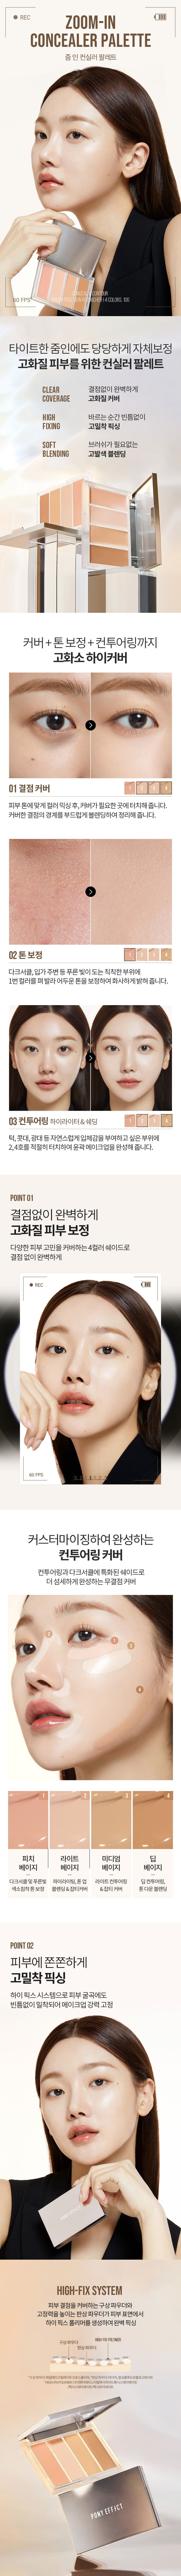 MEMEBOX Pony Effect Zoom In Concealer Palette korean skincare product online shop malaysia china macau1